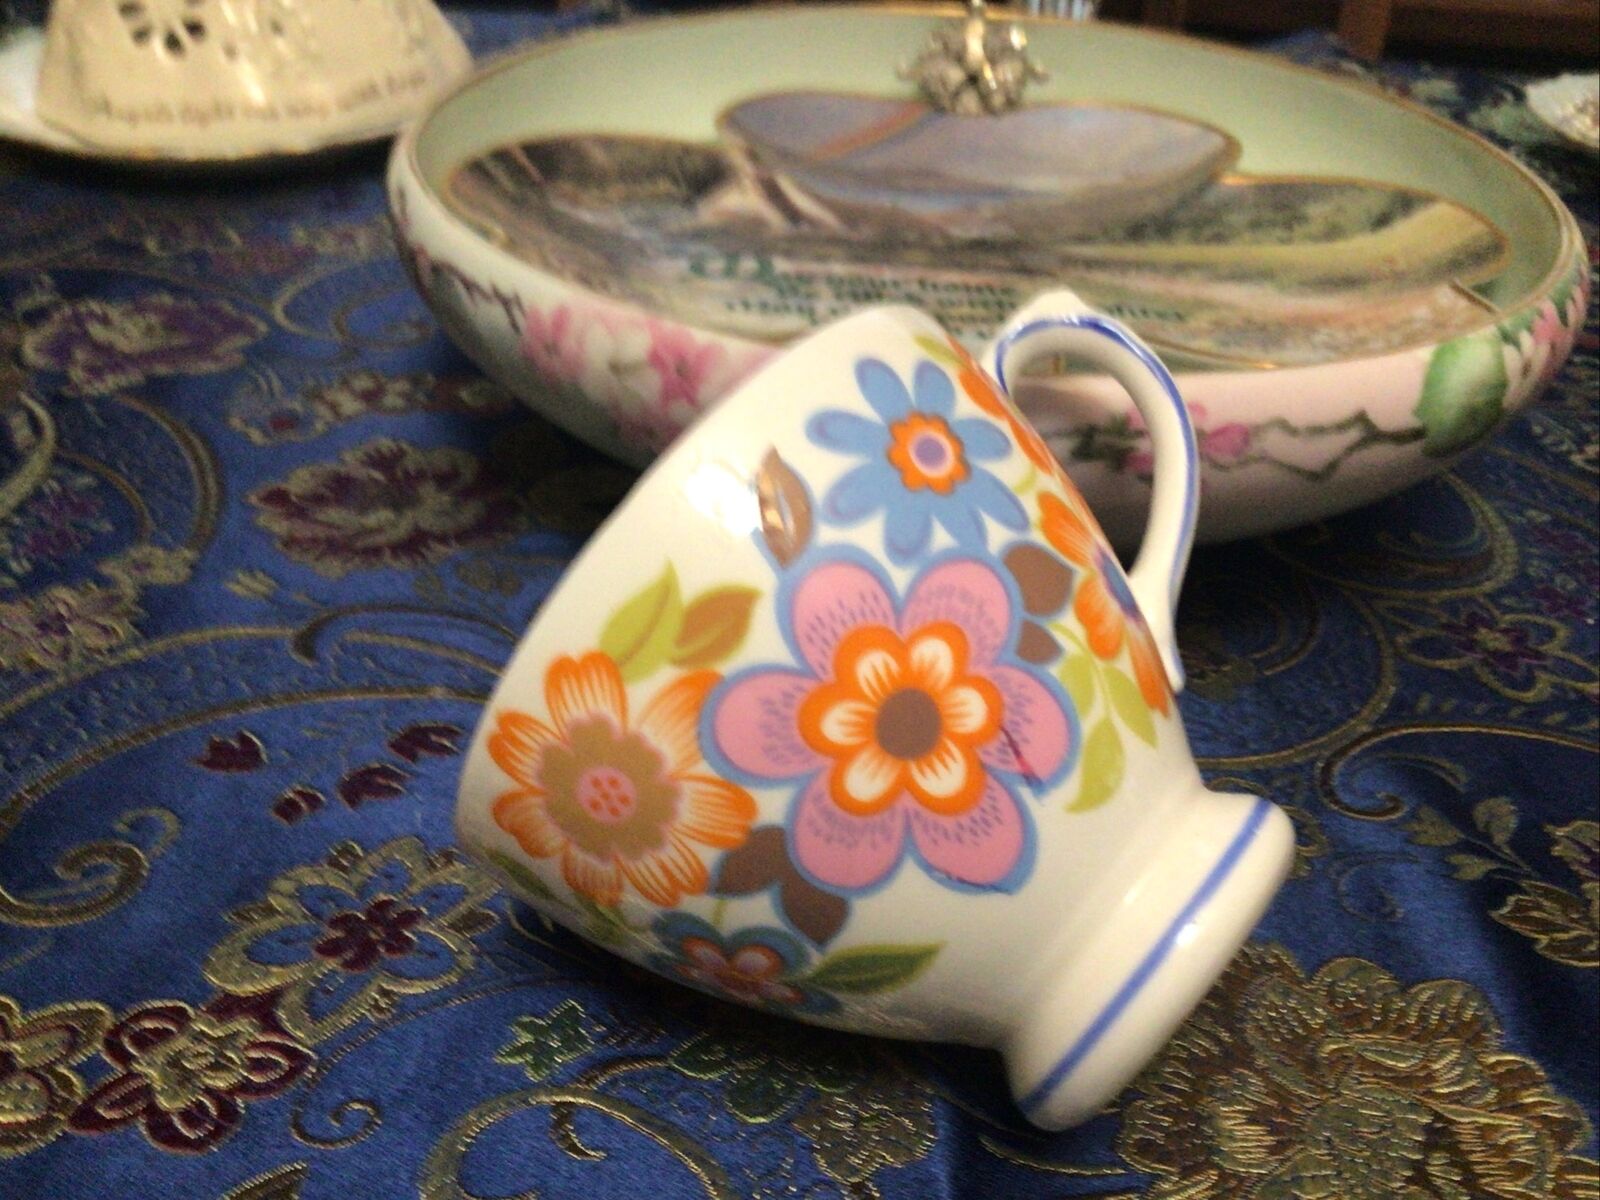 Ant/Vtg/Collectible Royal Sutherland Fine Bone China Cup   - Flower power style